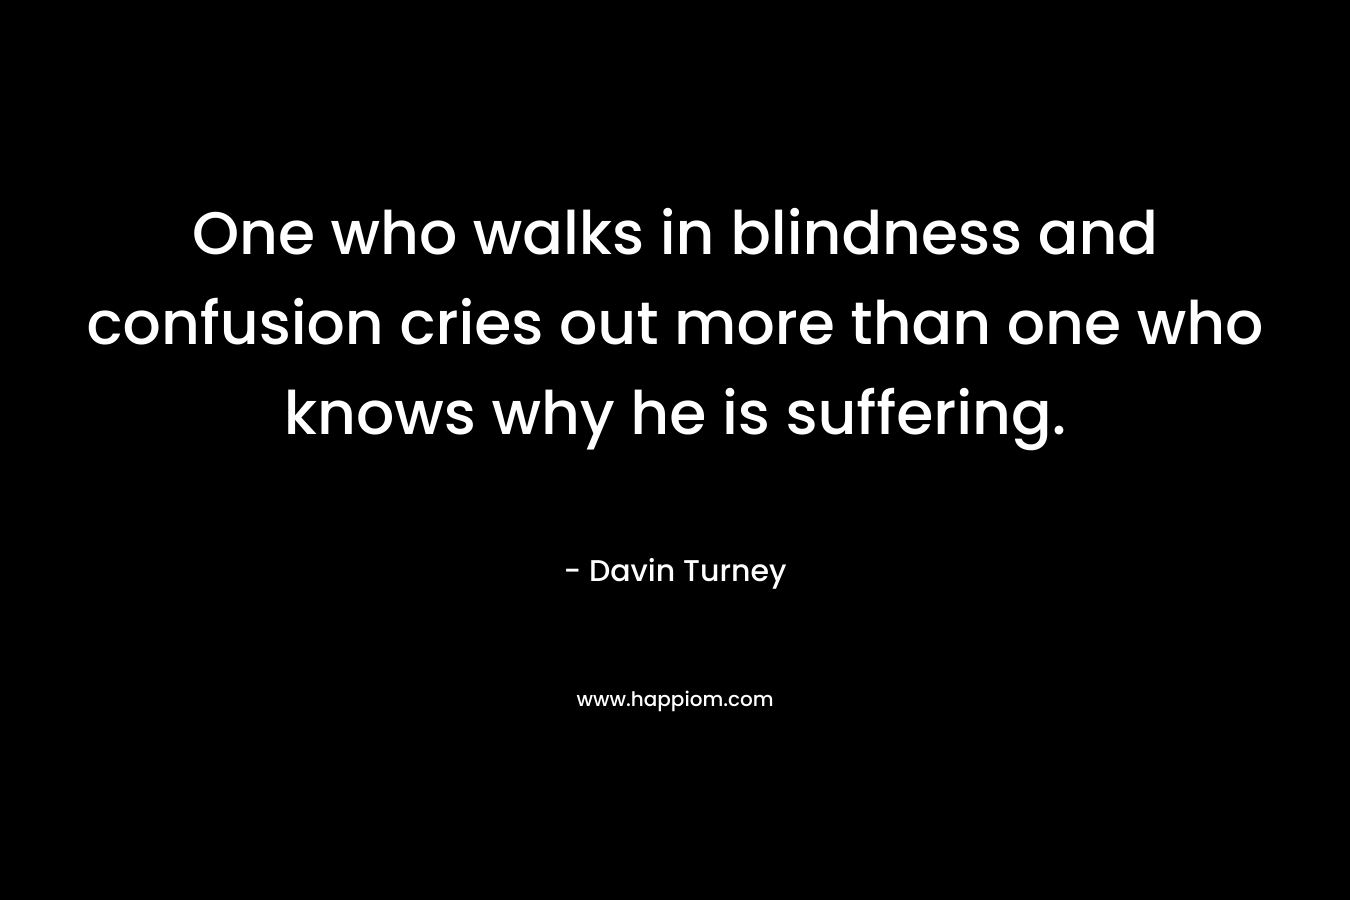 One who walks in blindness and confusion cries out more than one who knows why he is suffering. – Davin Turney